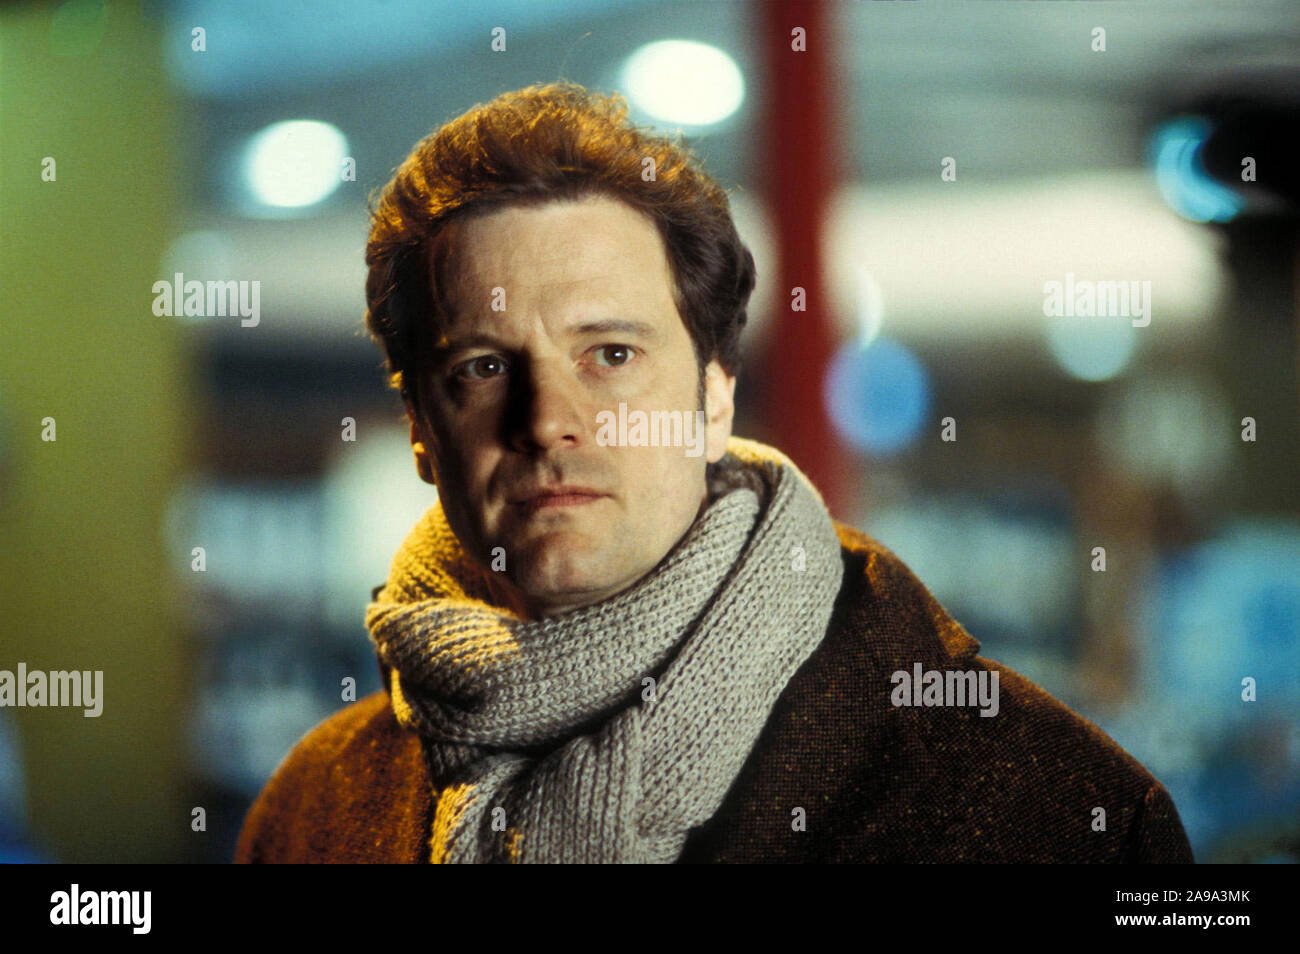 COLIN FIRTH in LOVE ACTUALLY (2003), directed by RICHARD CURTIS. Credit: UNIVERSAL STUDIOS / Album Stock Photo